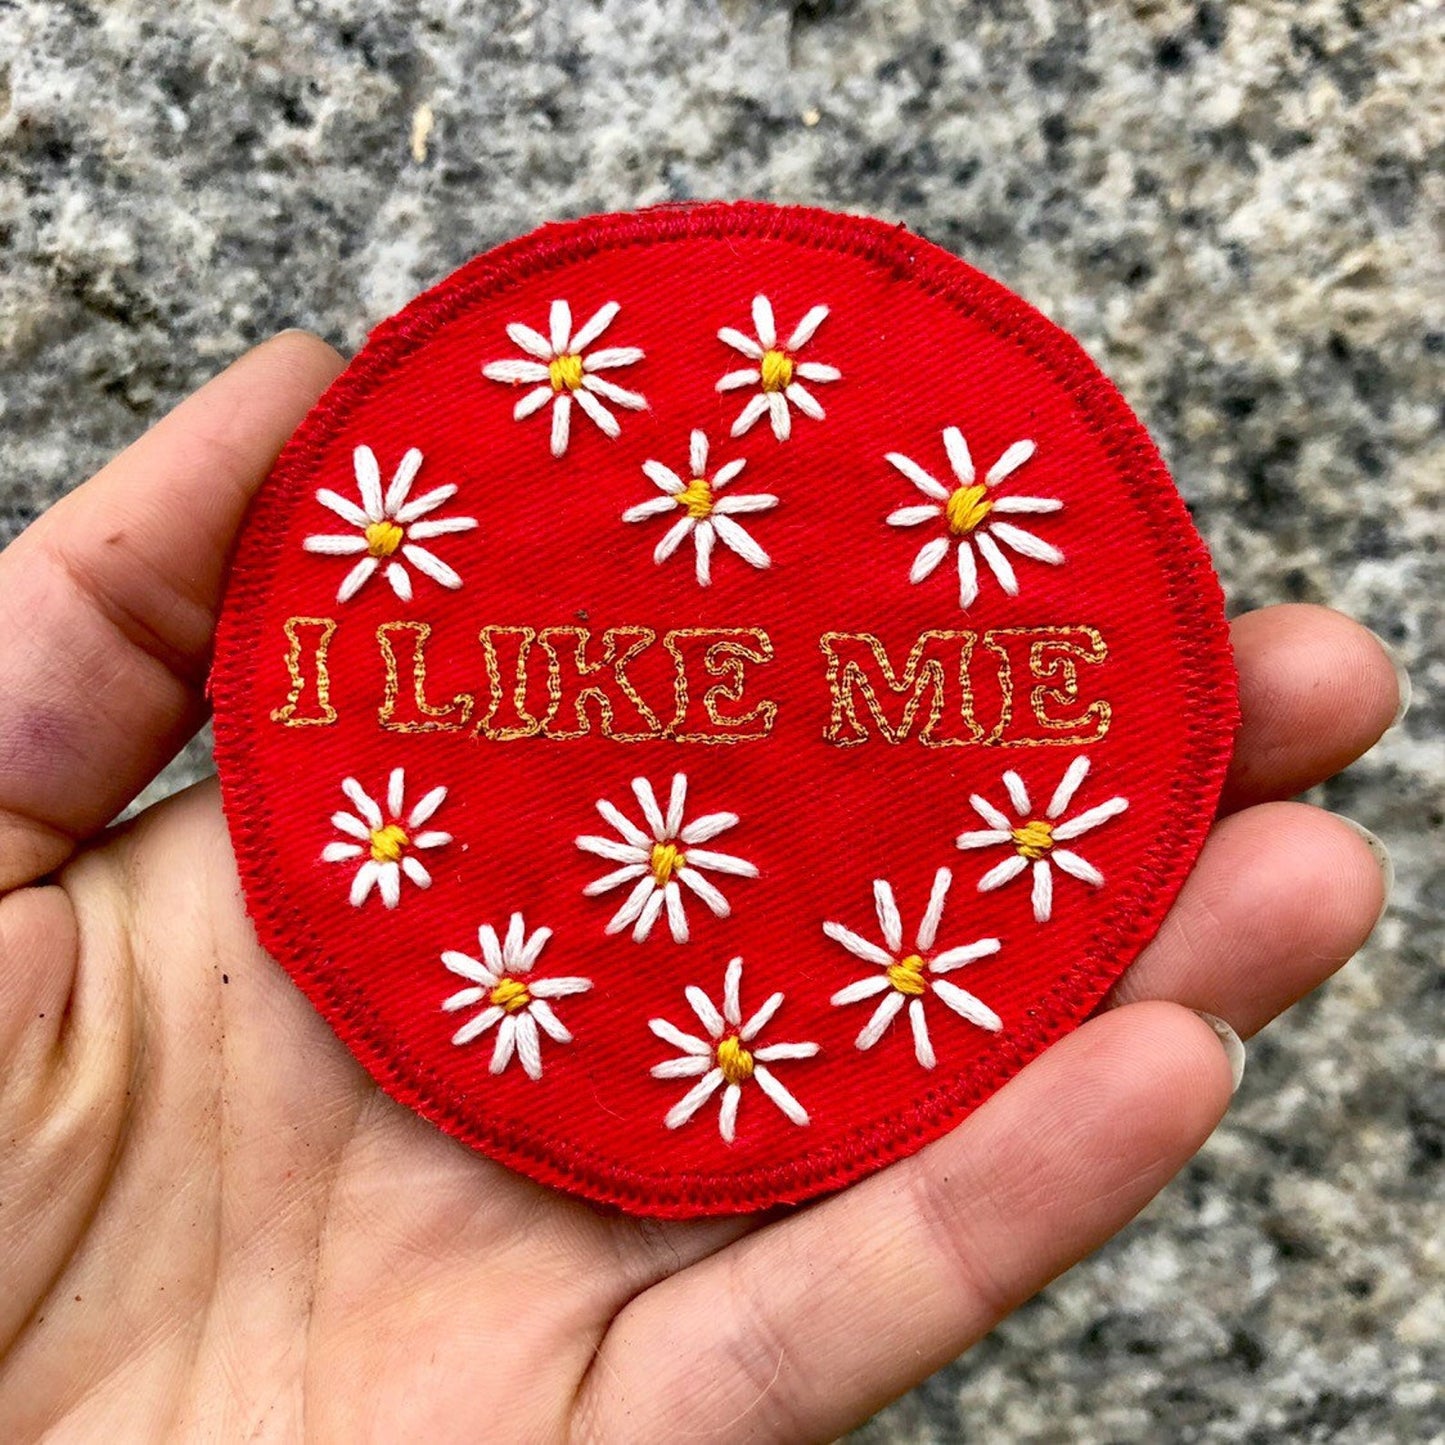 Positive Affirmation Badge. Hand Embroidered Canvas Patch